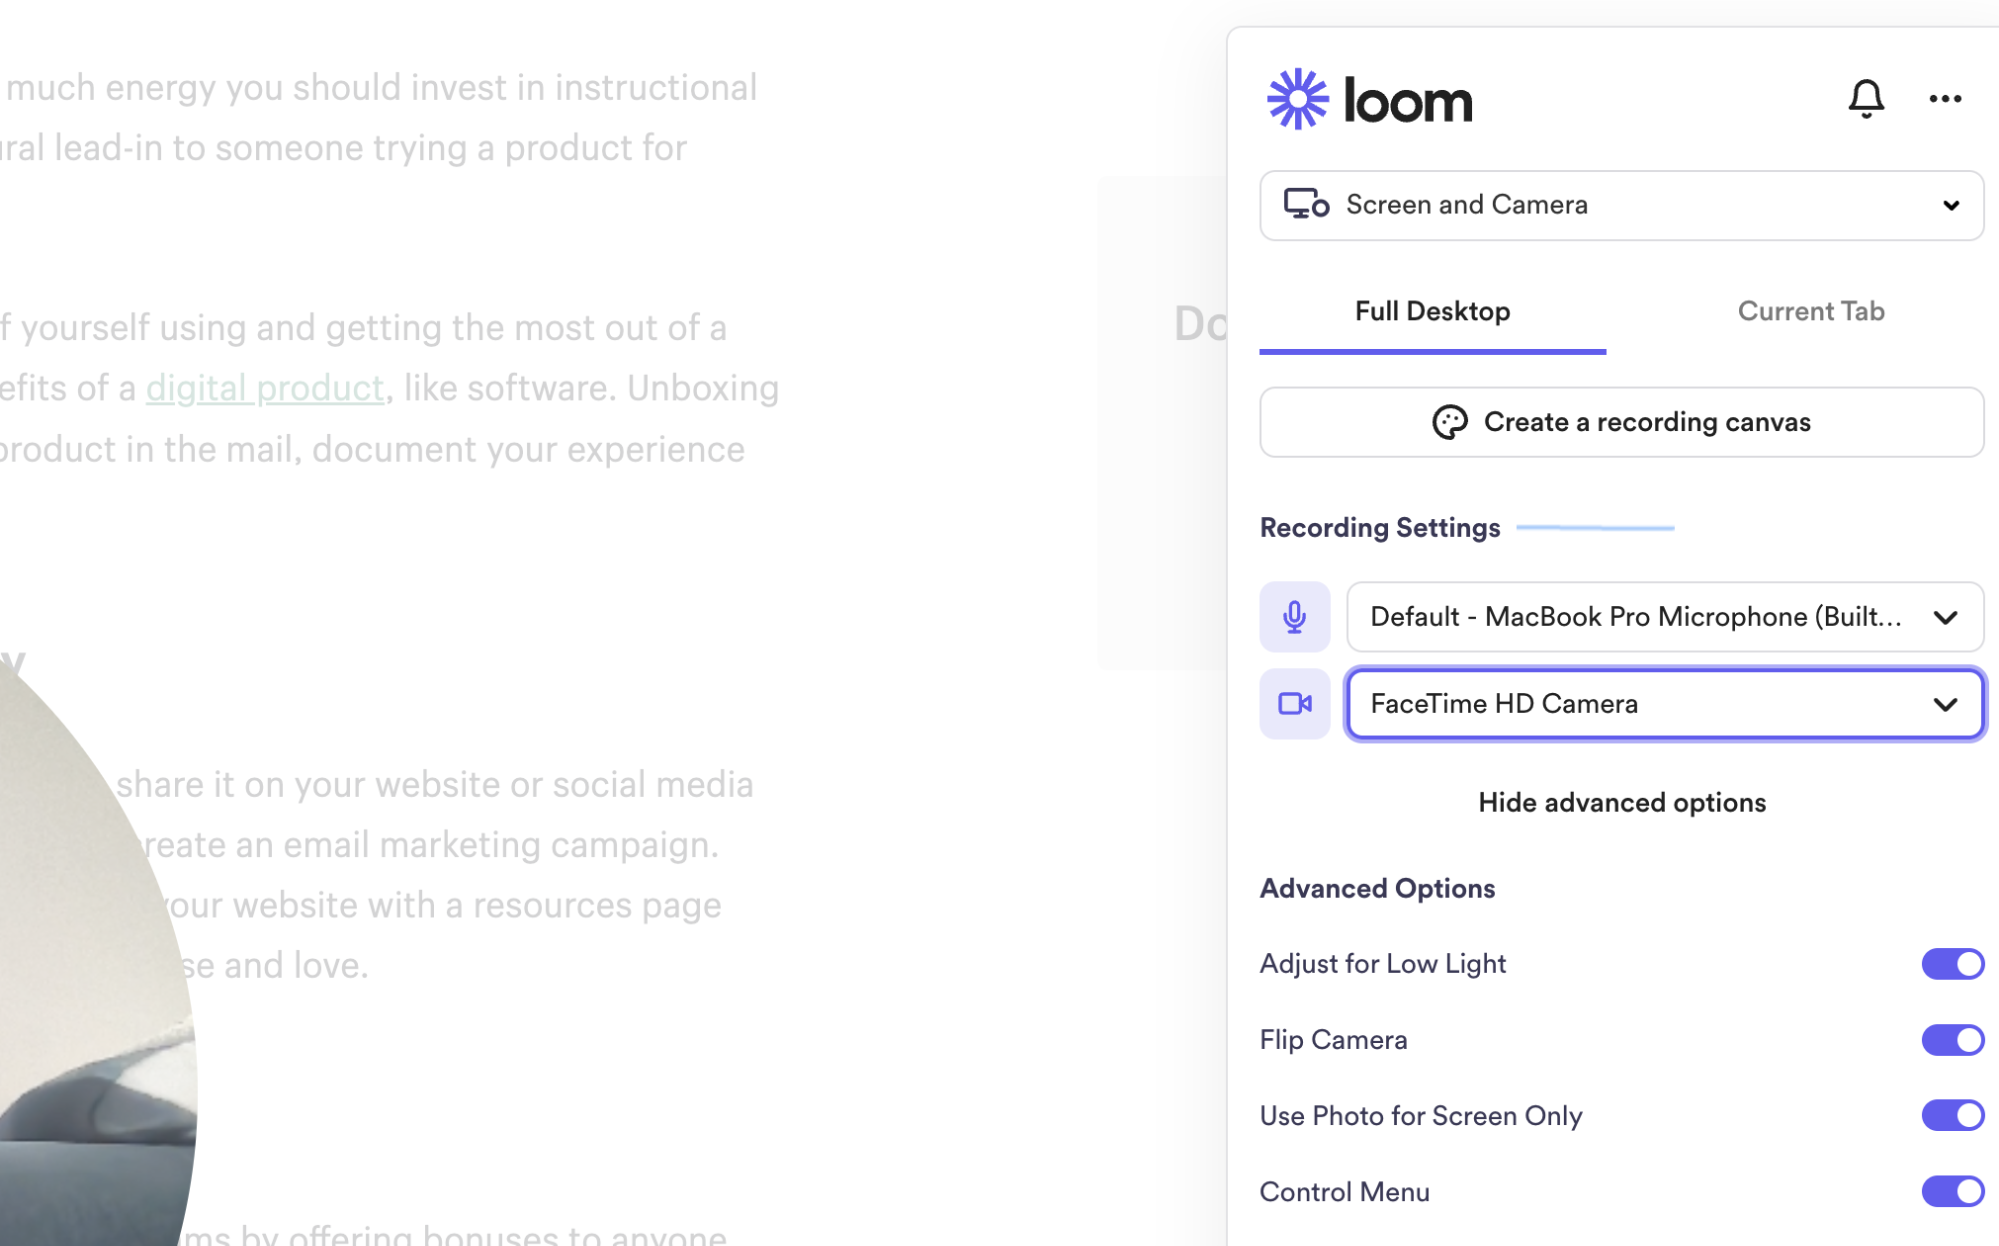 Loom recording interface with options for screen and camera capture.